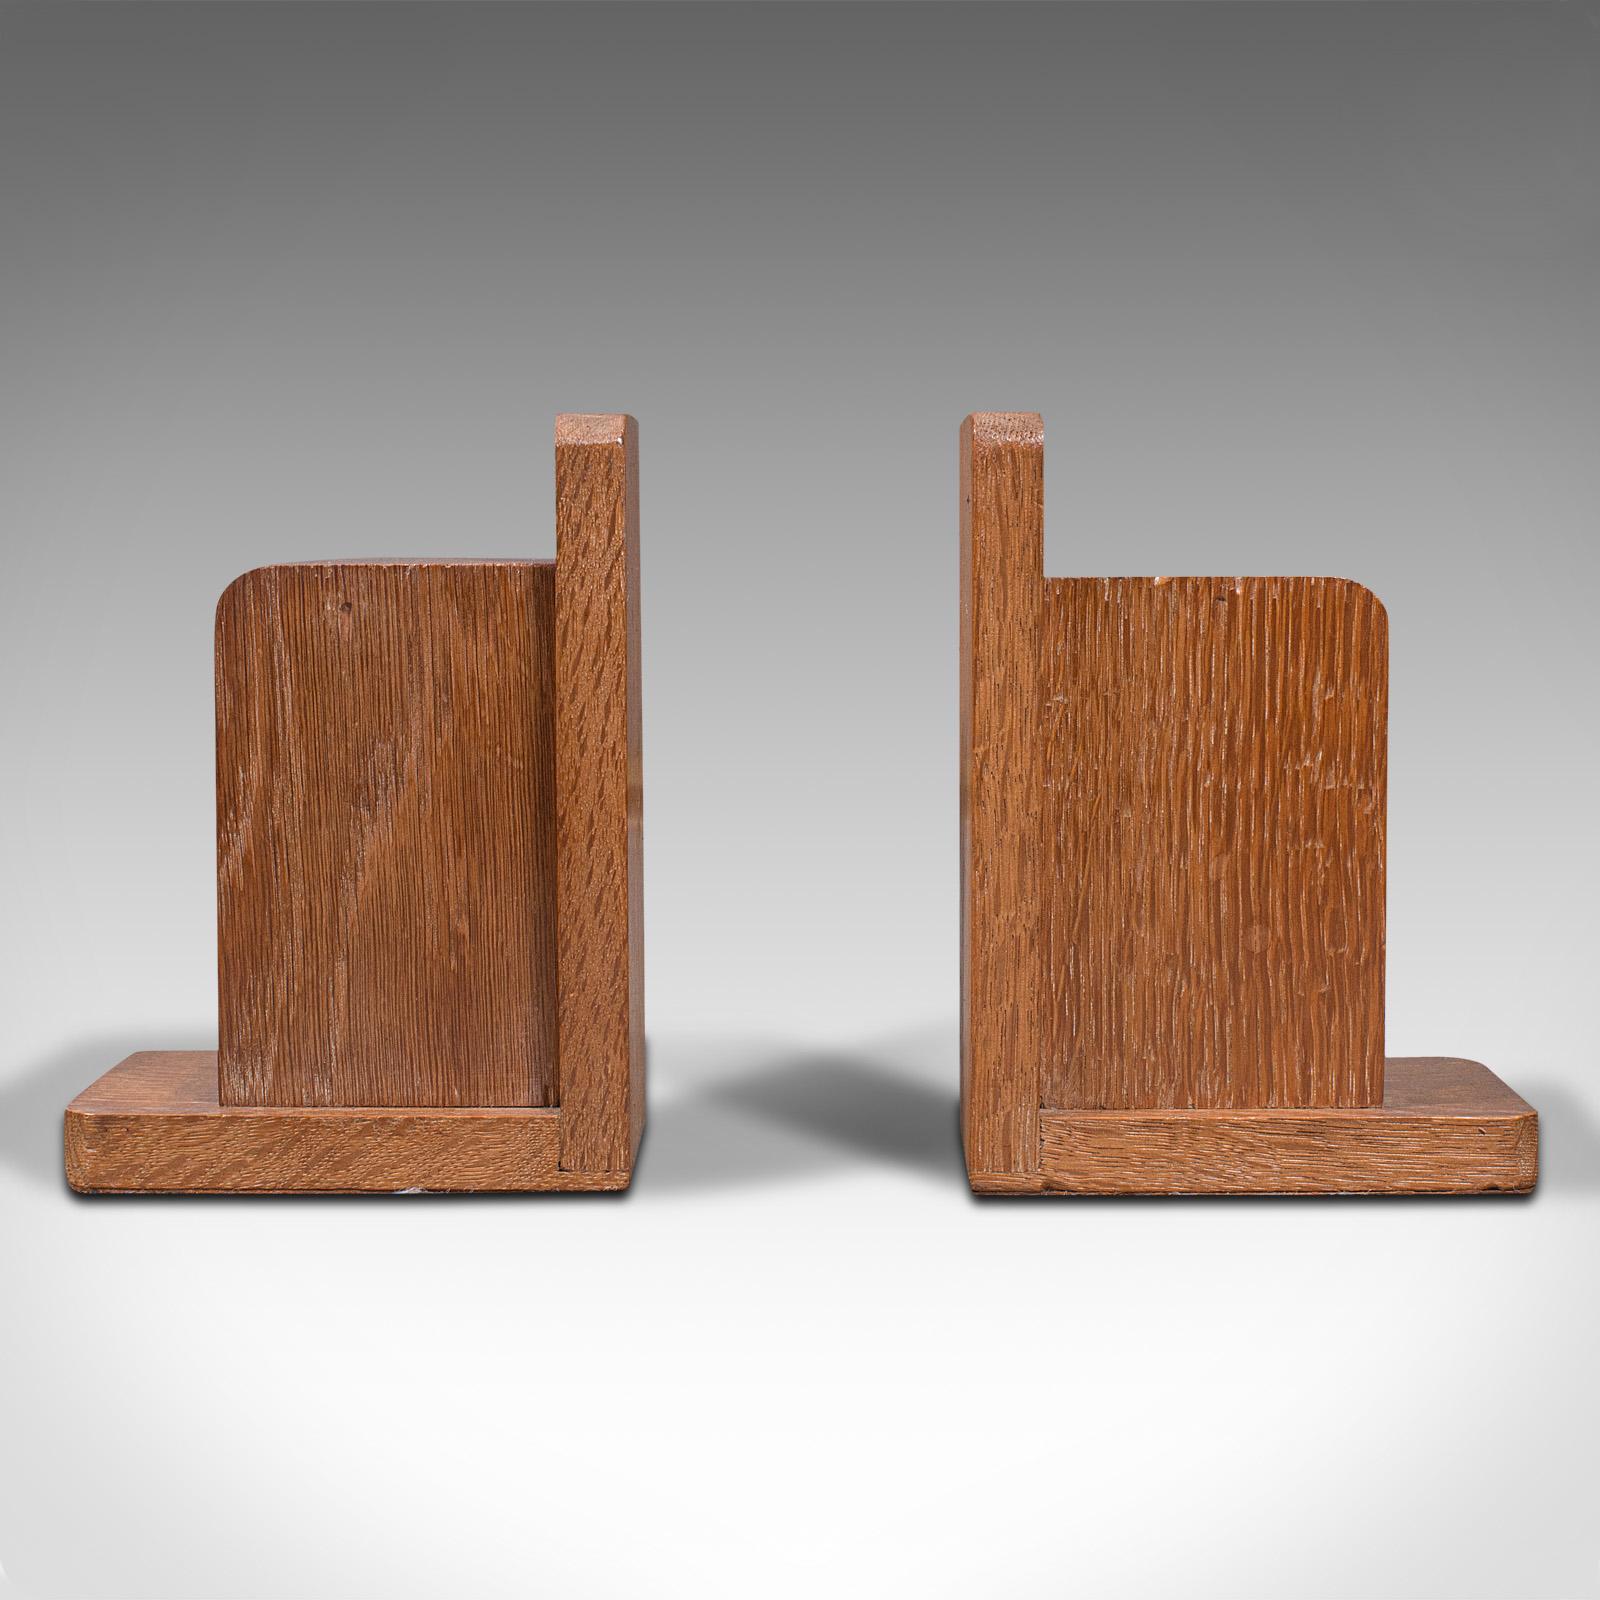 This is a pair of vintage decorative bookends. An English, light oak book rest in the manner of Liberty, dating to the Art Deco period, circa 1940.

Appealing forms inspired by the aesthetic of Heals and Liberty of London
Displaying a desirable